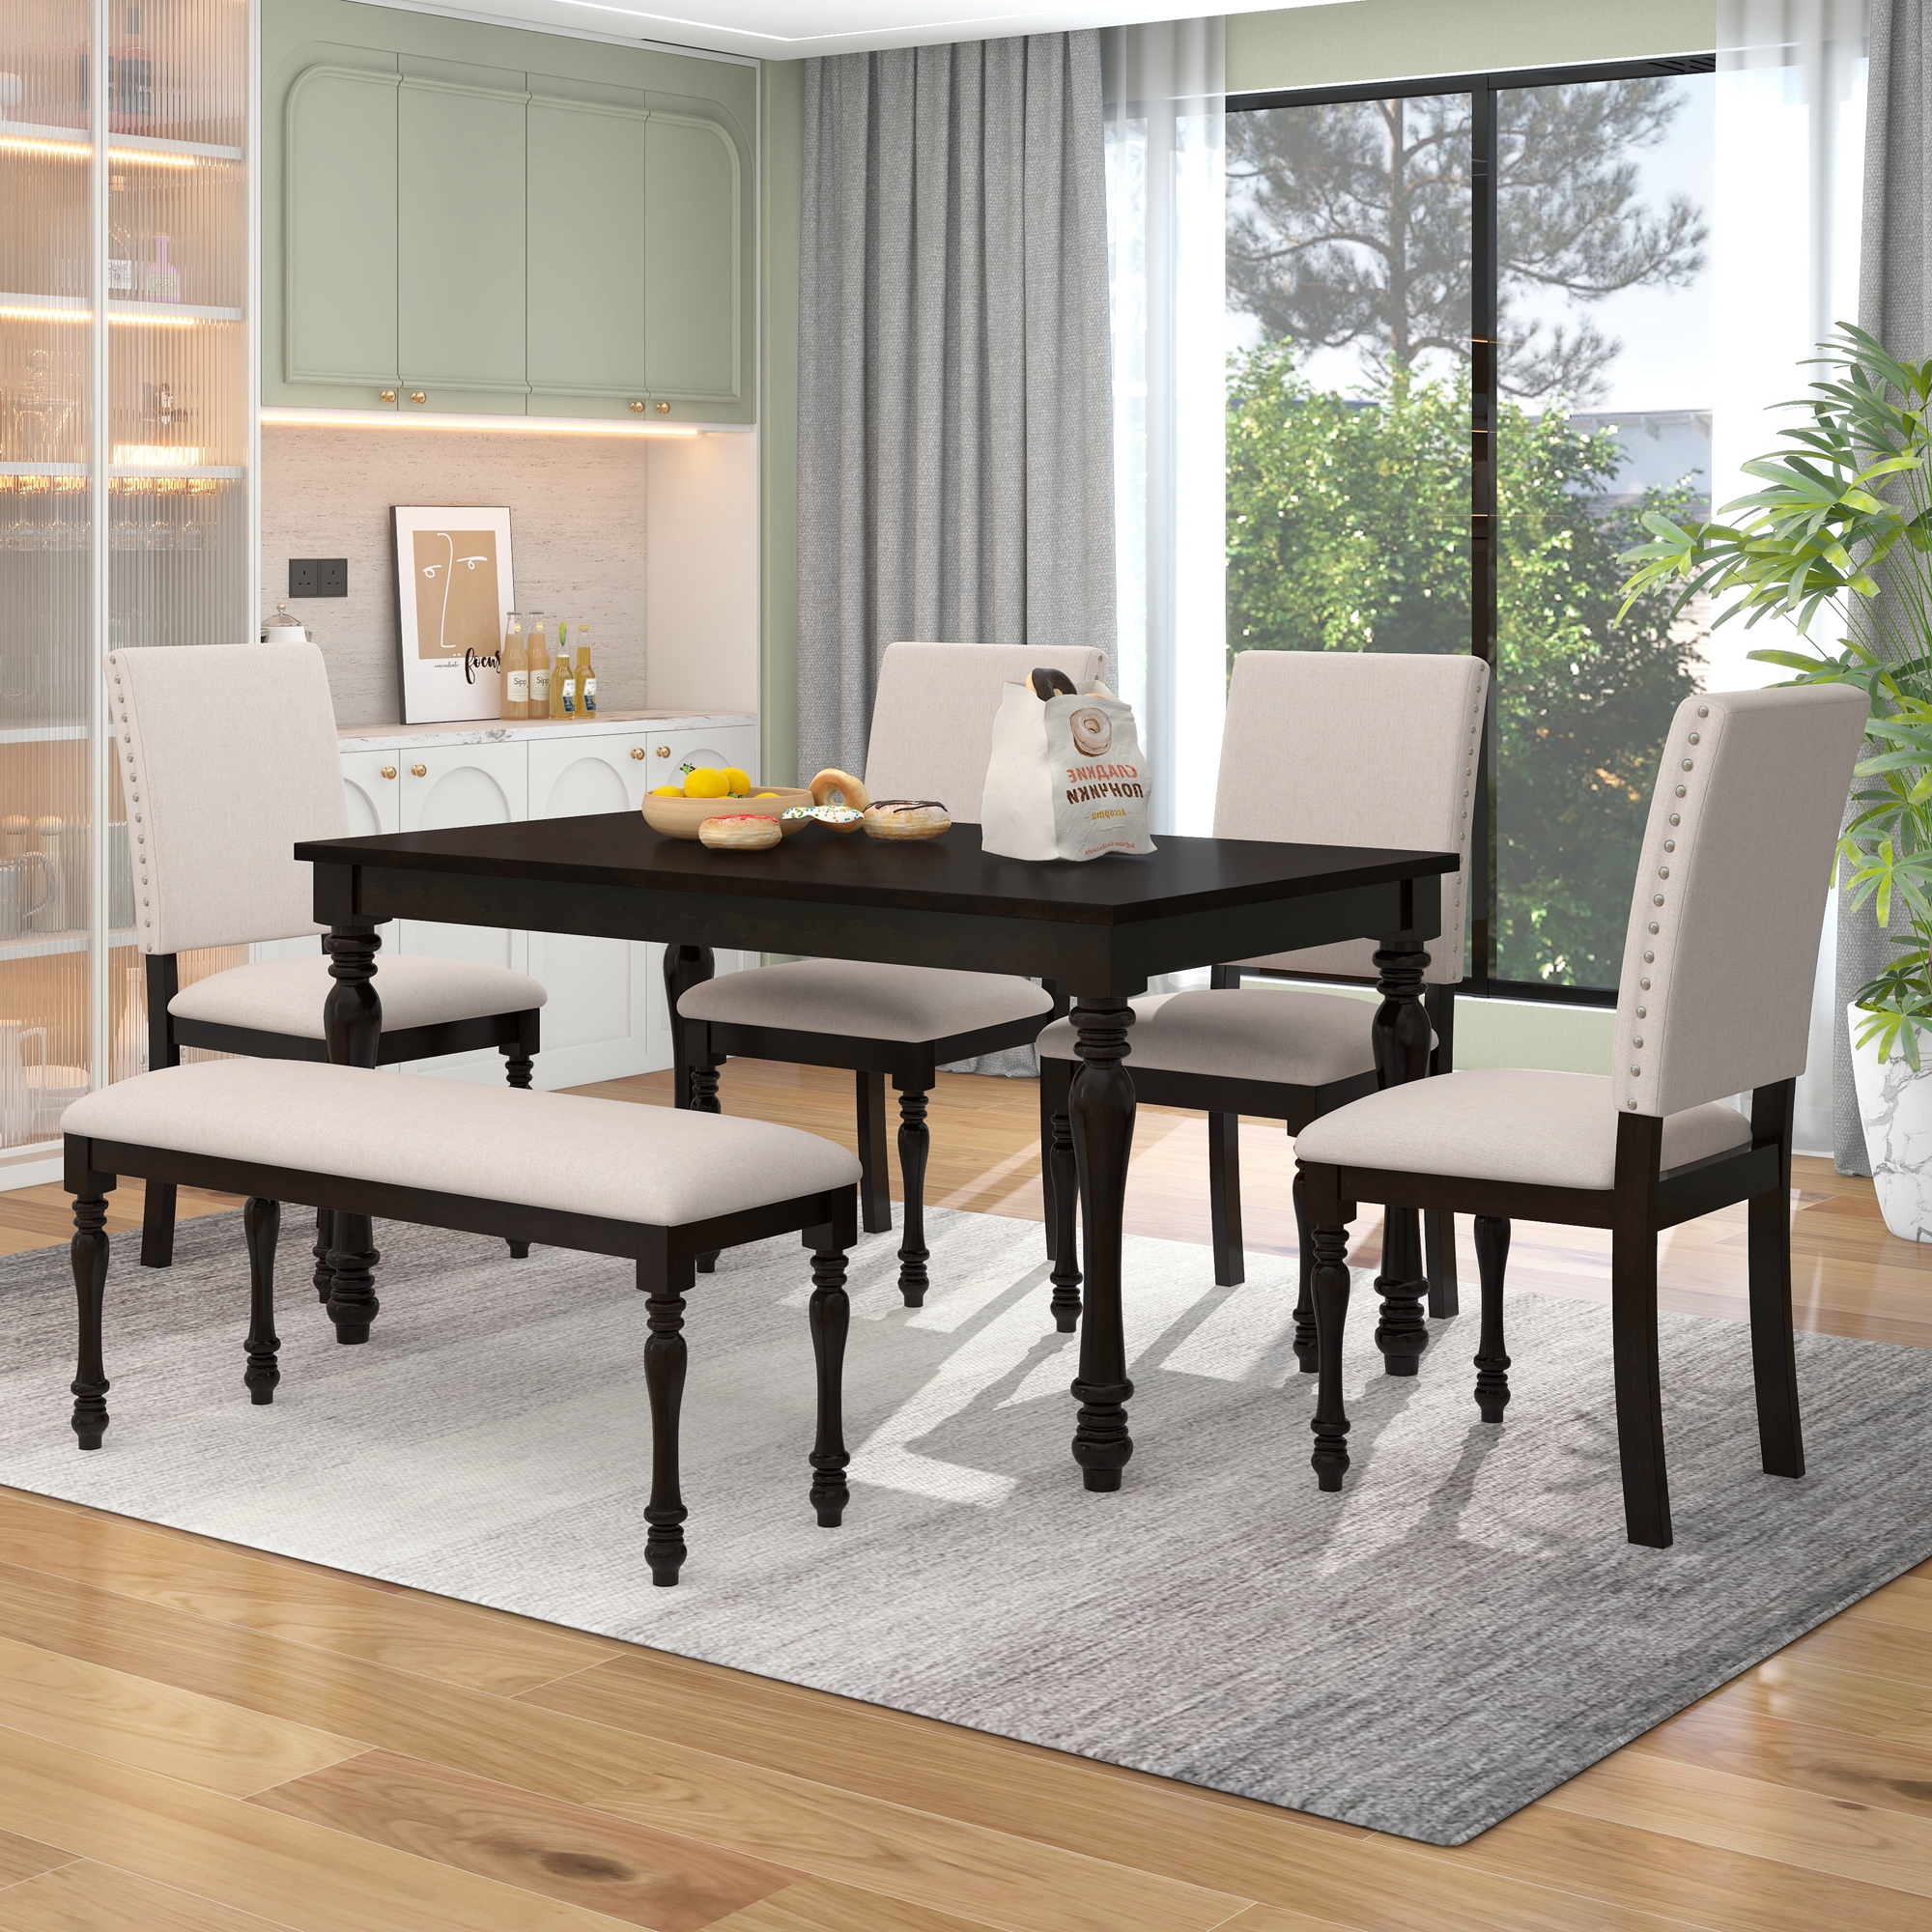 TREXM 6-Piece Wood Dining Table Set - ST000076AAP